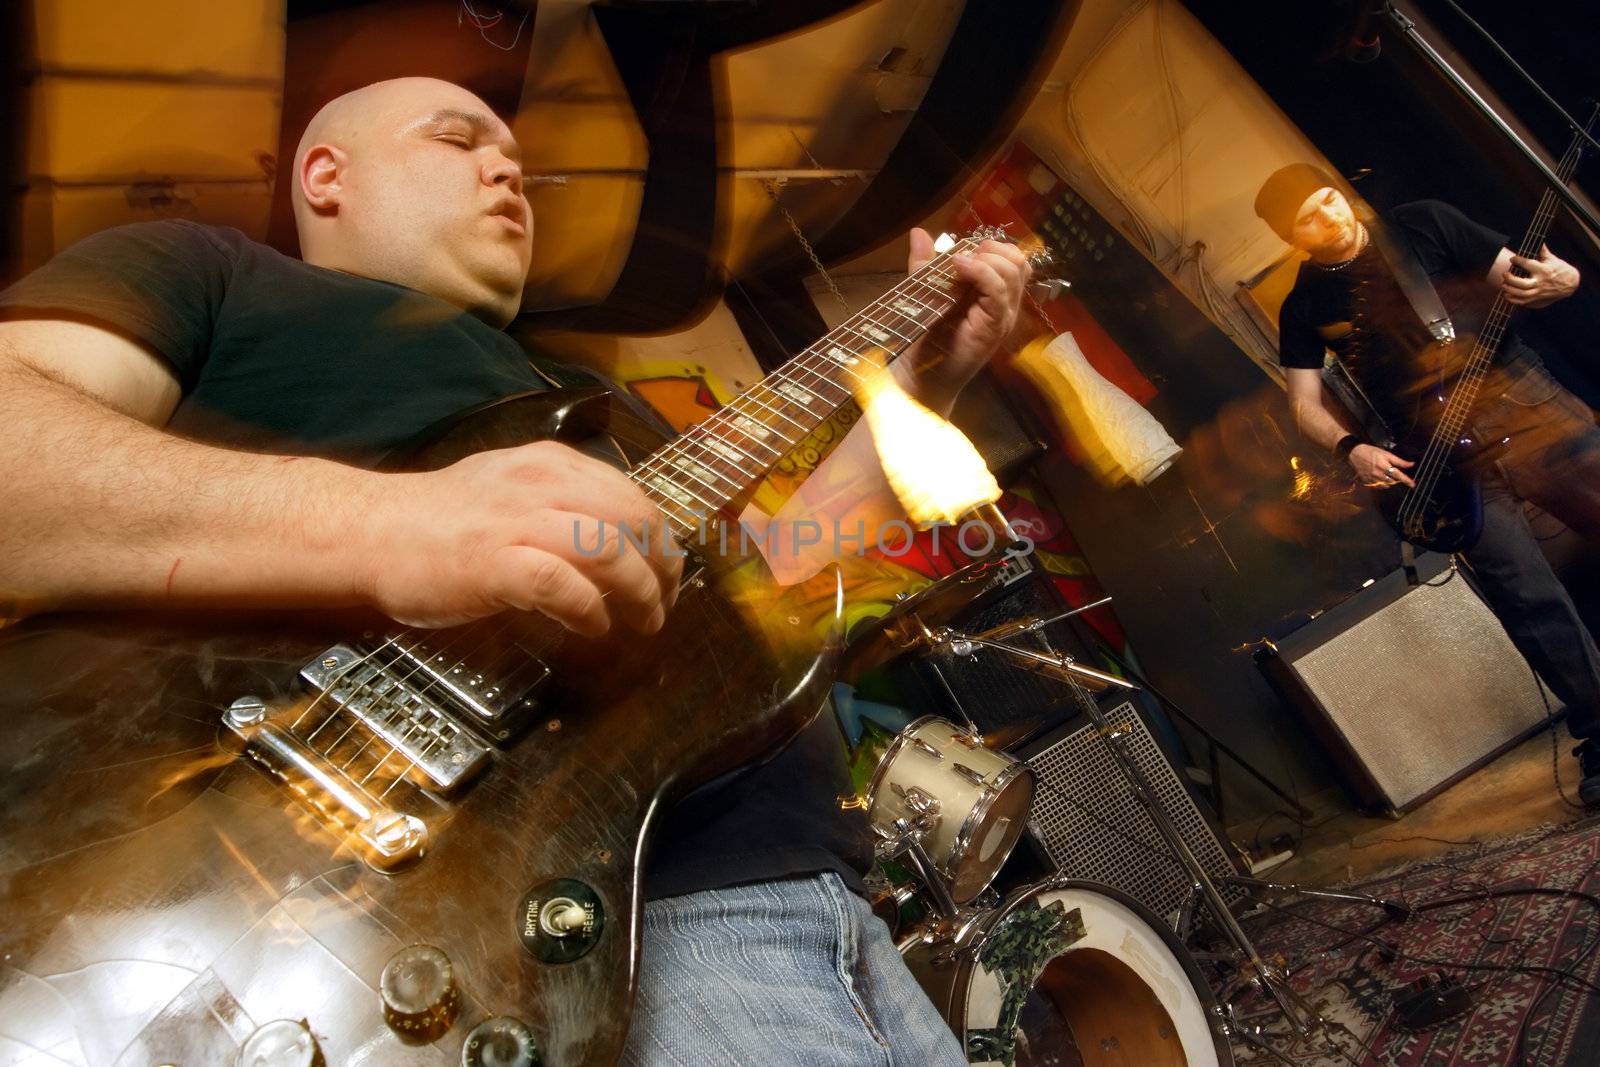 Heavy rock band playing. Shot with strobes and slow shutter speed to create lighting atmosphere and blur effects.
